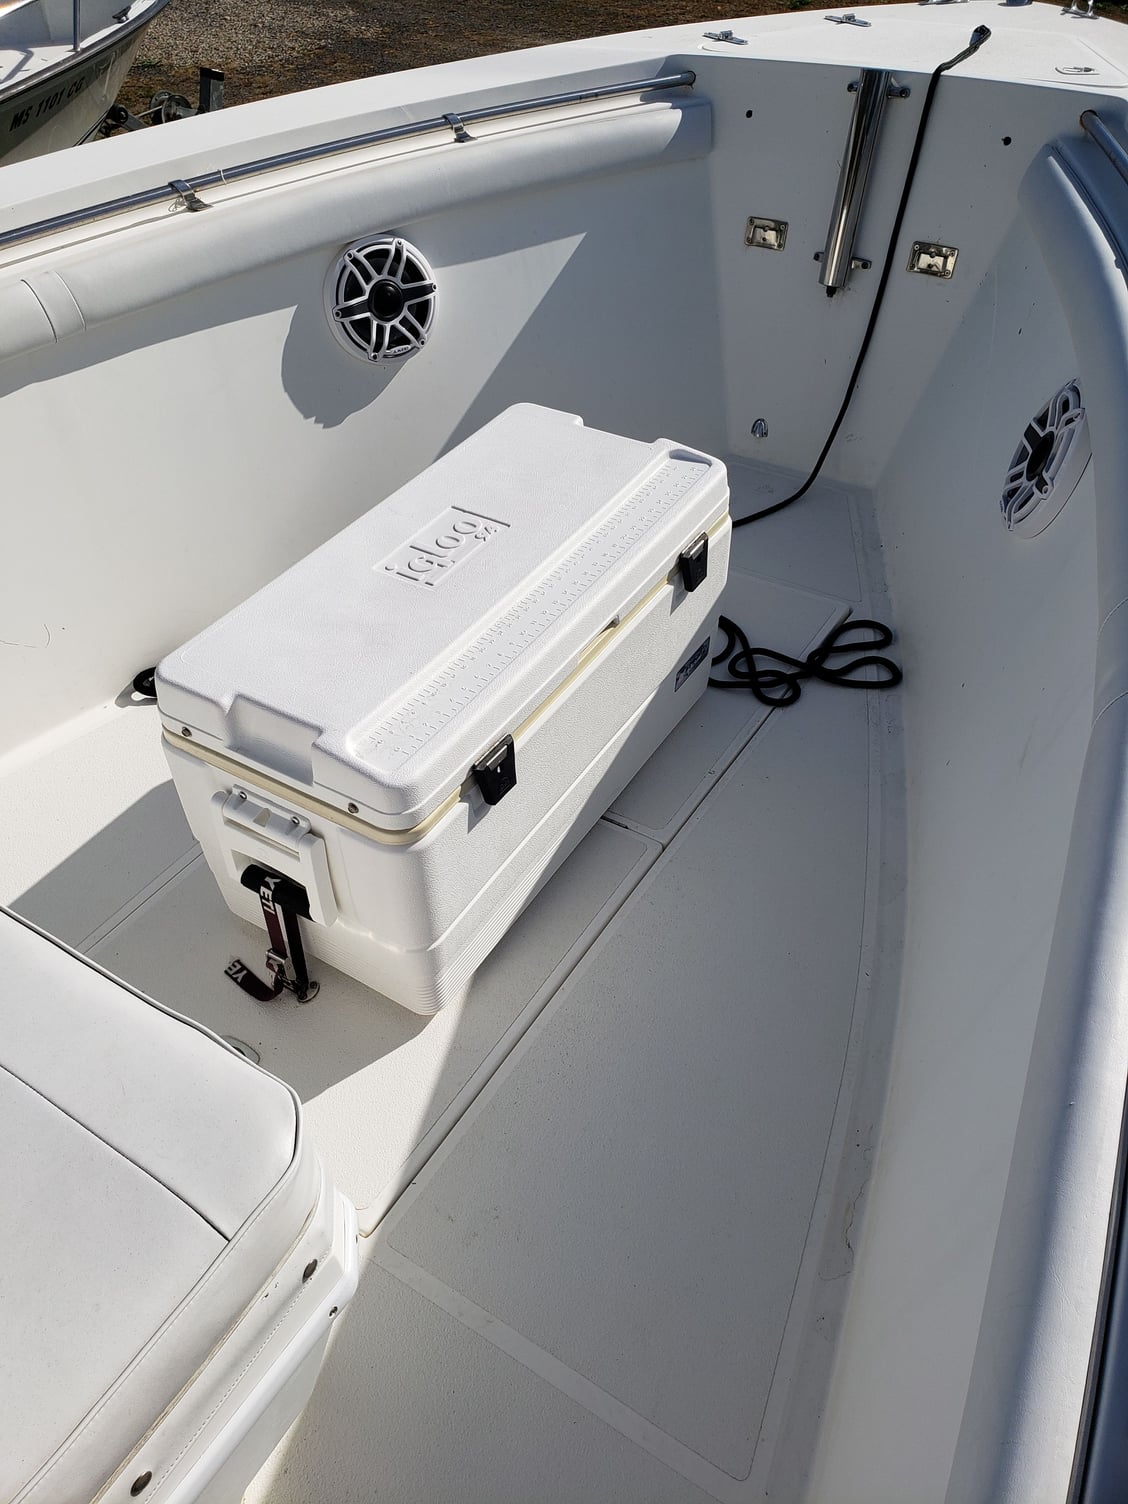 Coffin Box Cooler - The Hull Truth - Boating and Fishing Forum